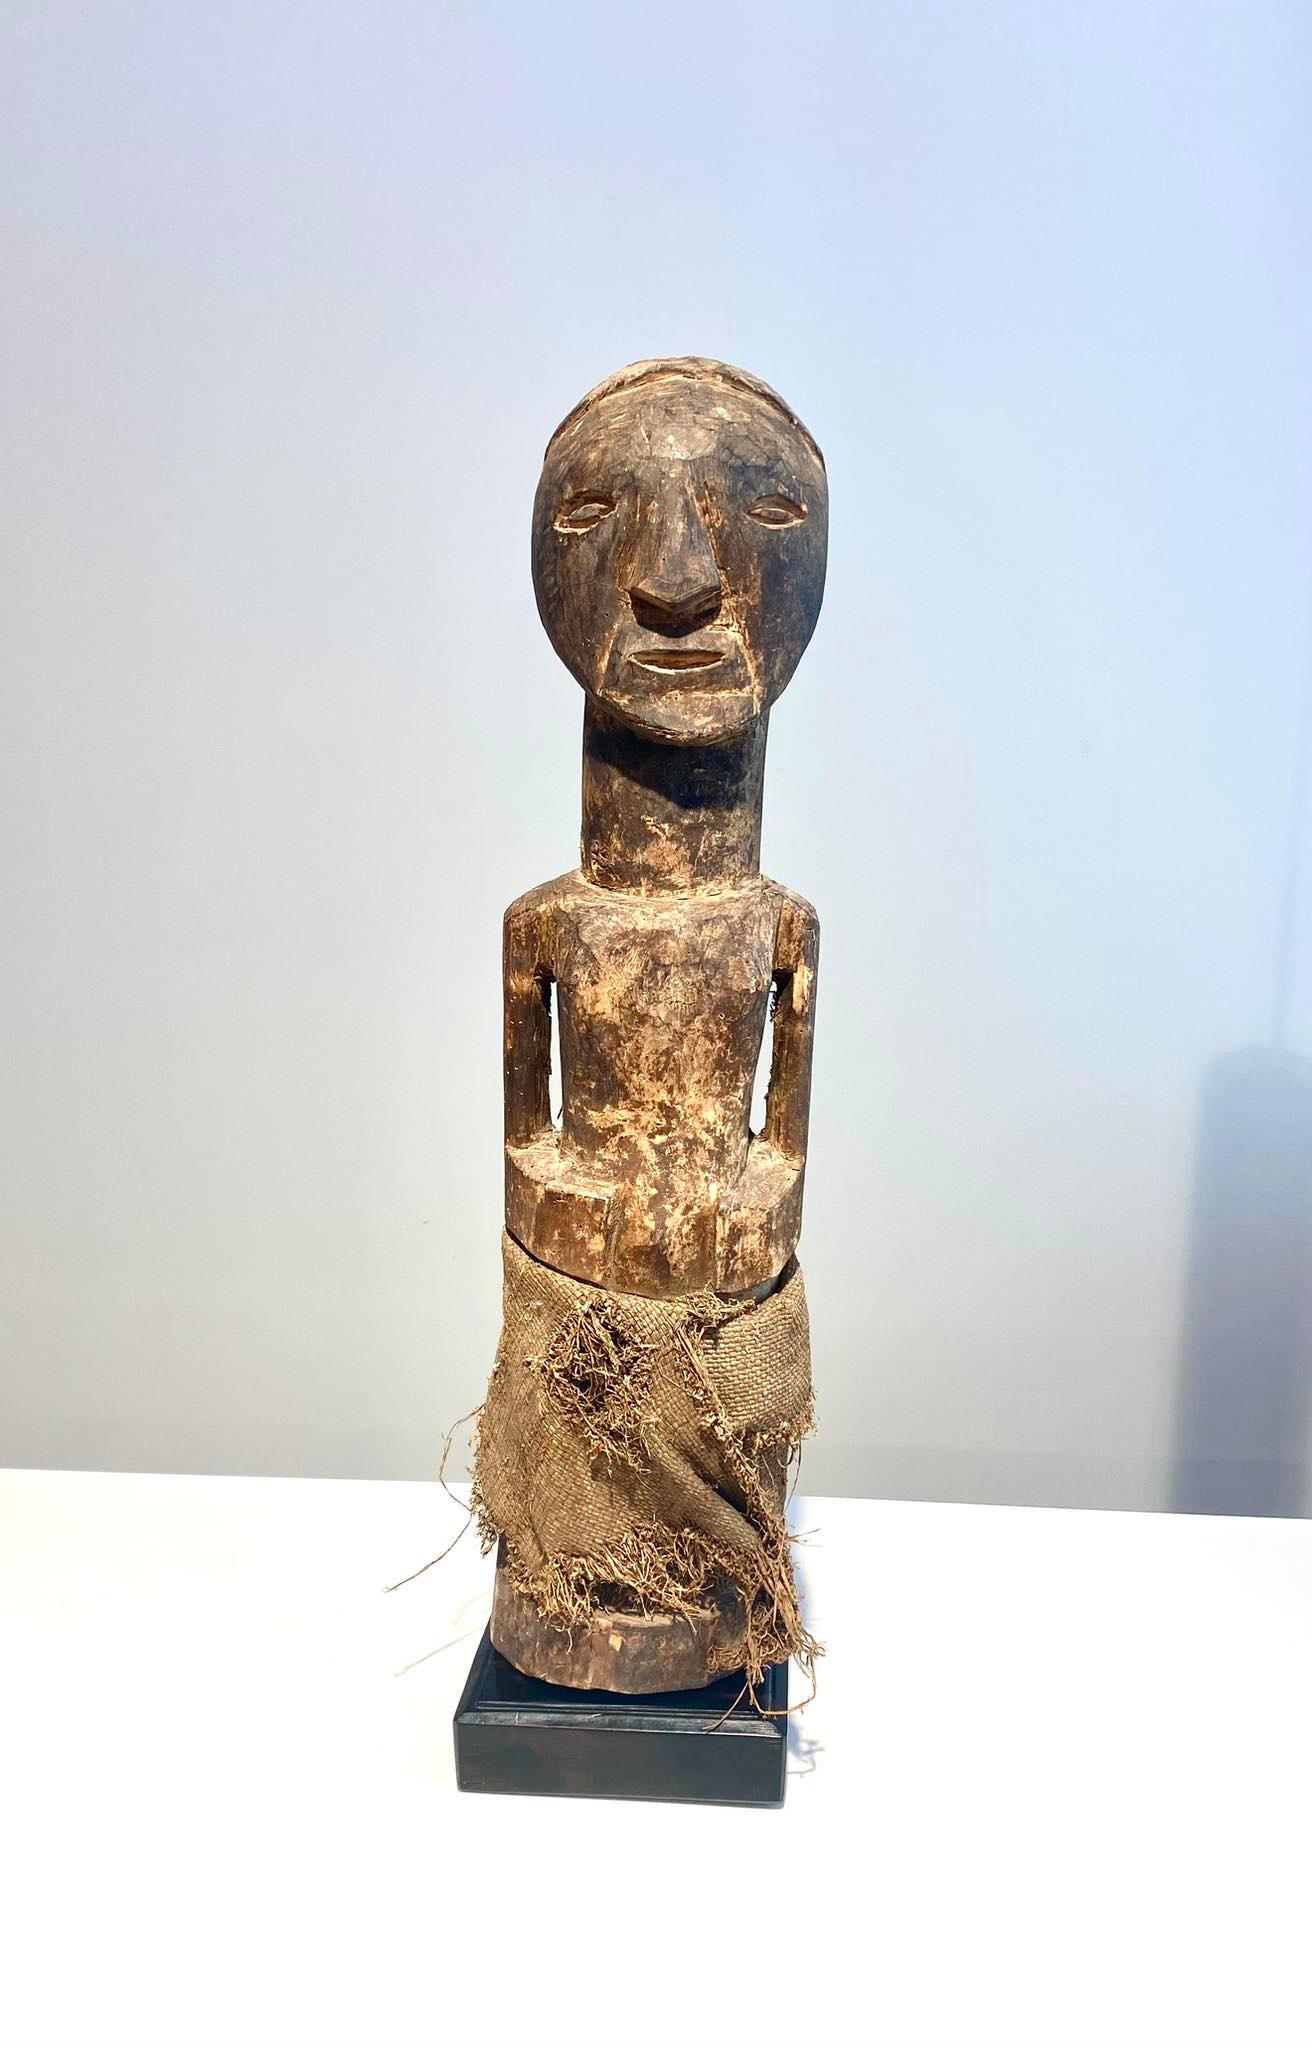 Old Big Authentic Antique And Rare Nkishi Powerful Statue Songye / Songe People - Dr Congo 
Period: early 20th century
Height: 58 cm
Very beautiful patina

Note : Spirits of the dead, whether benevolent or malevolent, were thought to interfere in